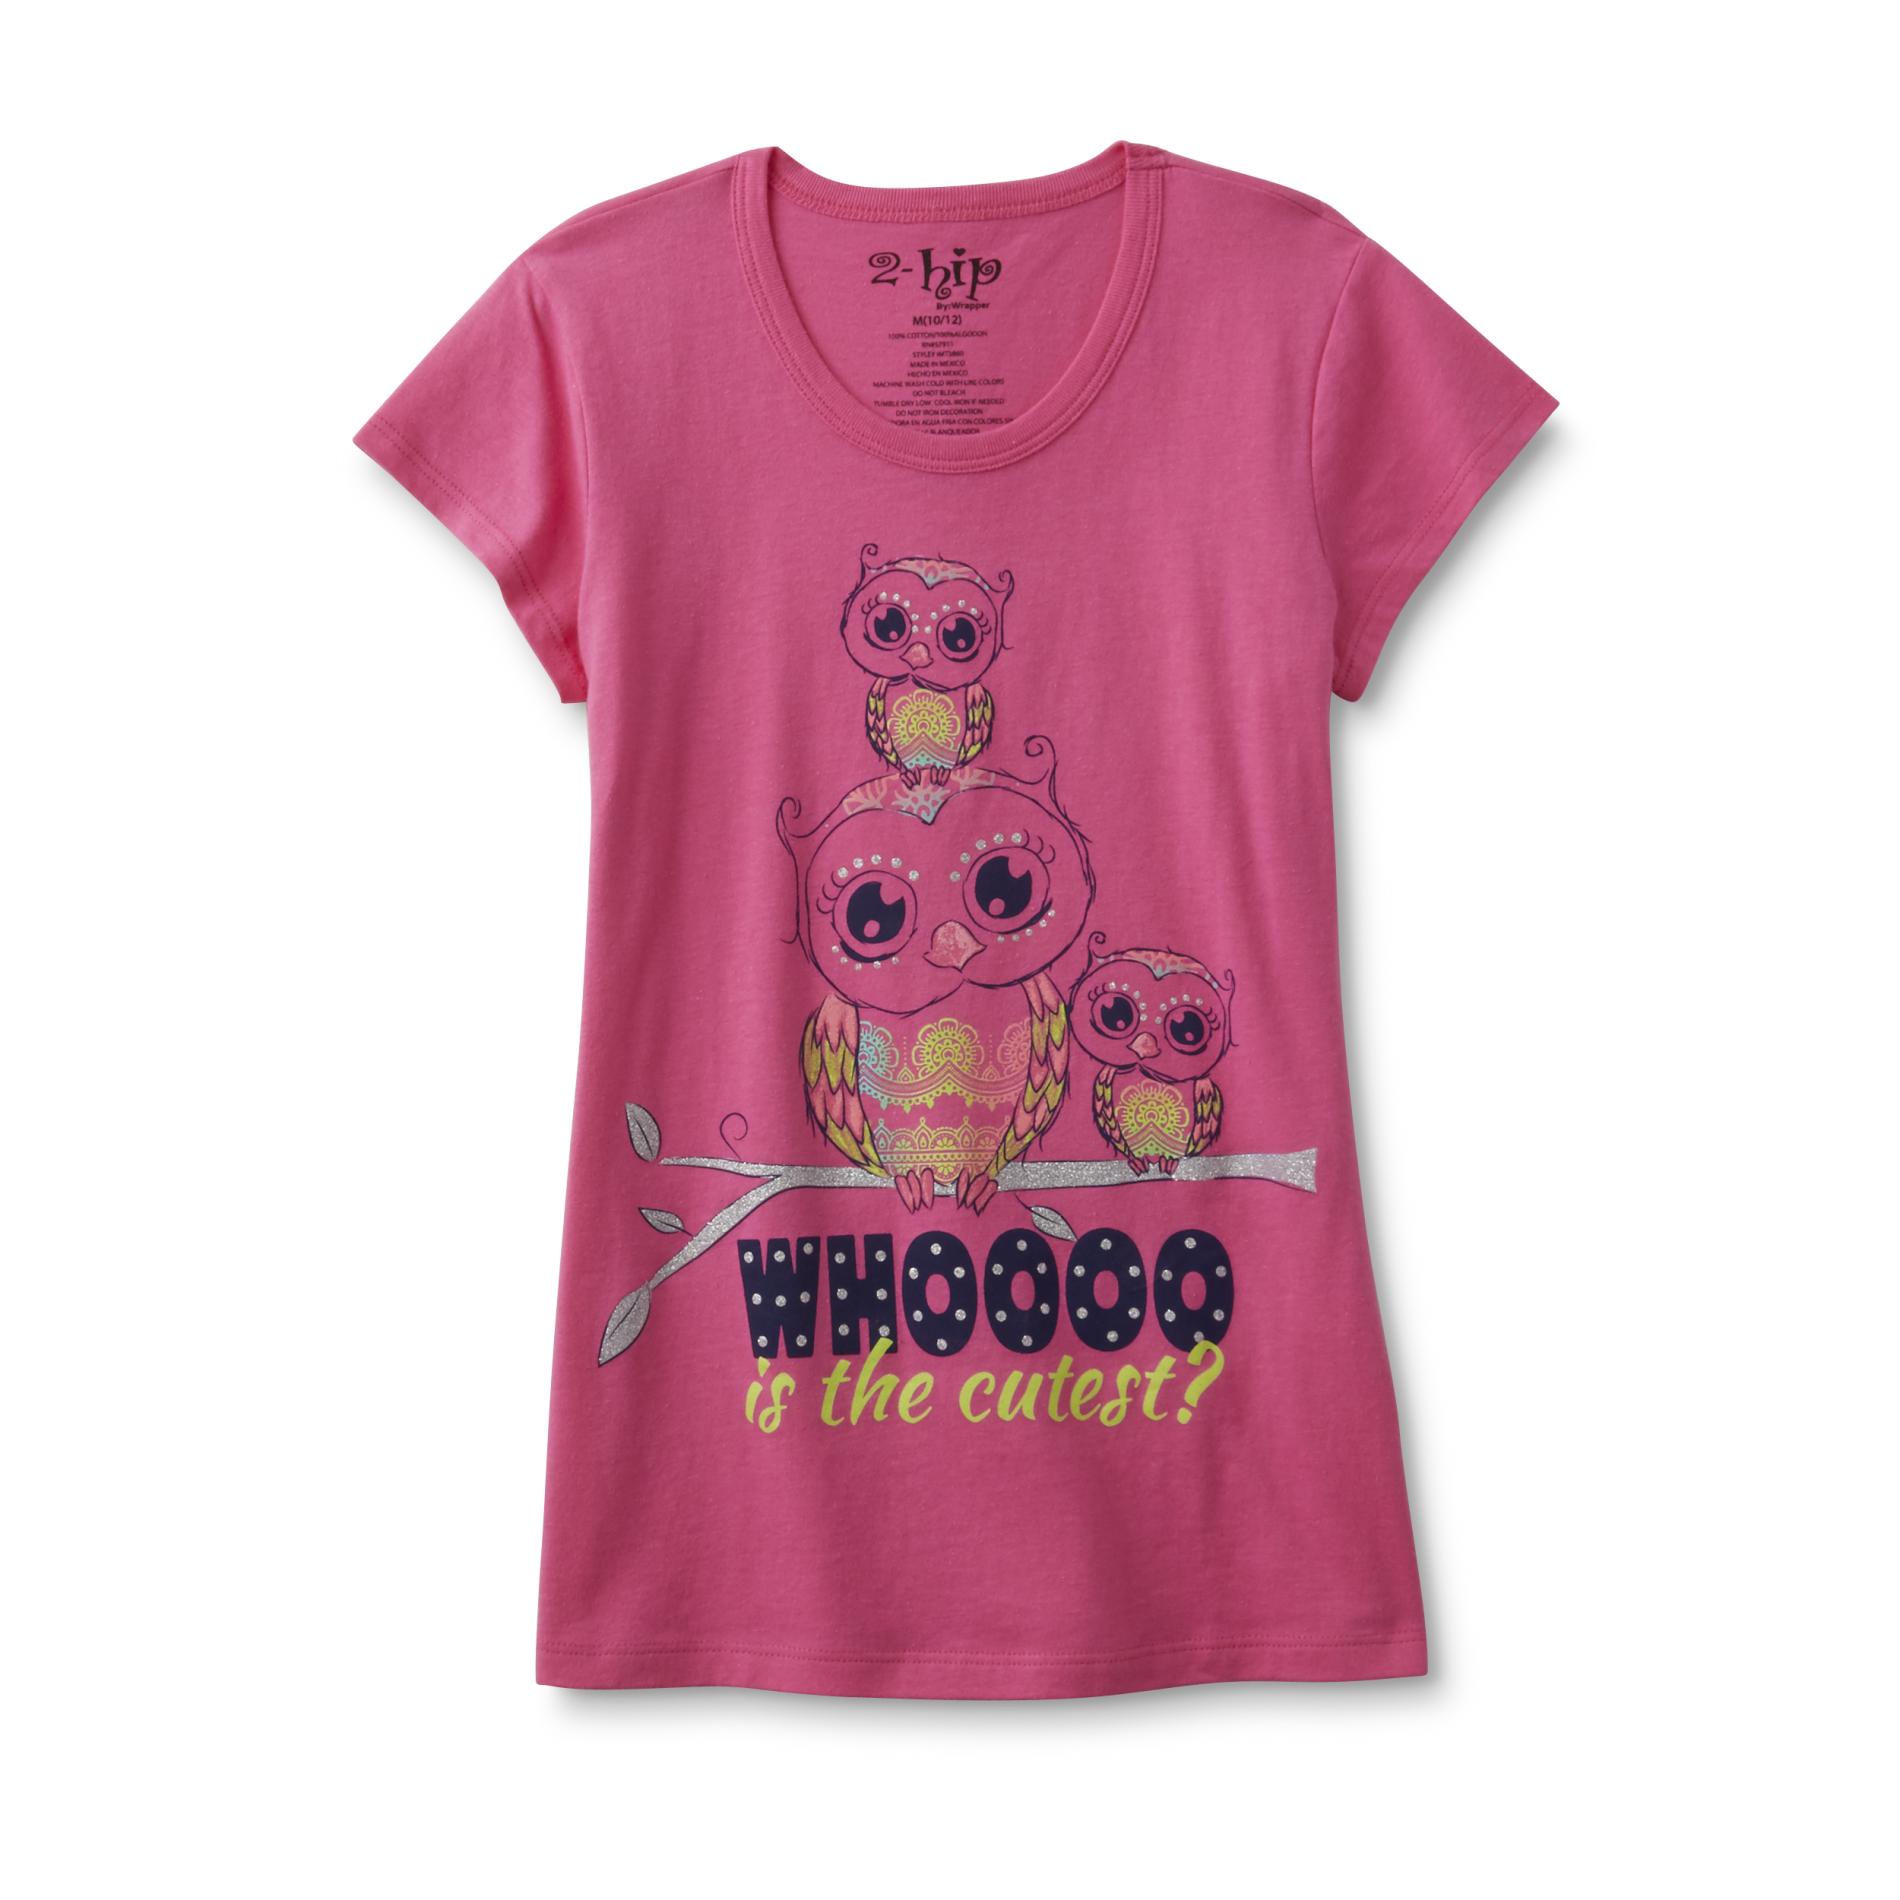 Girl's Graphic T-Shirt - Owls